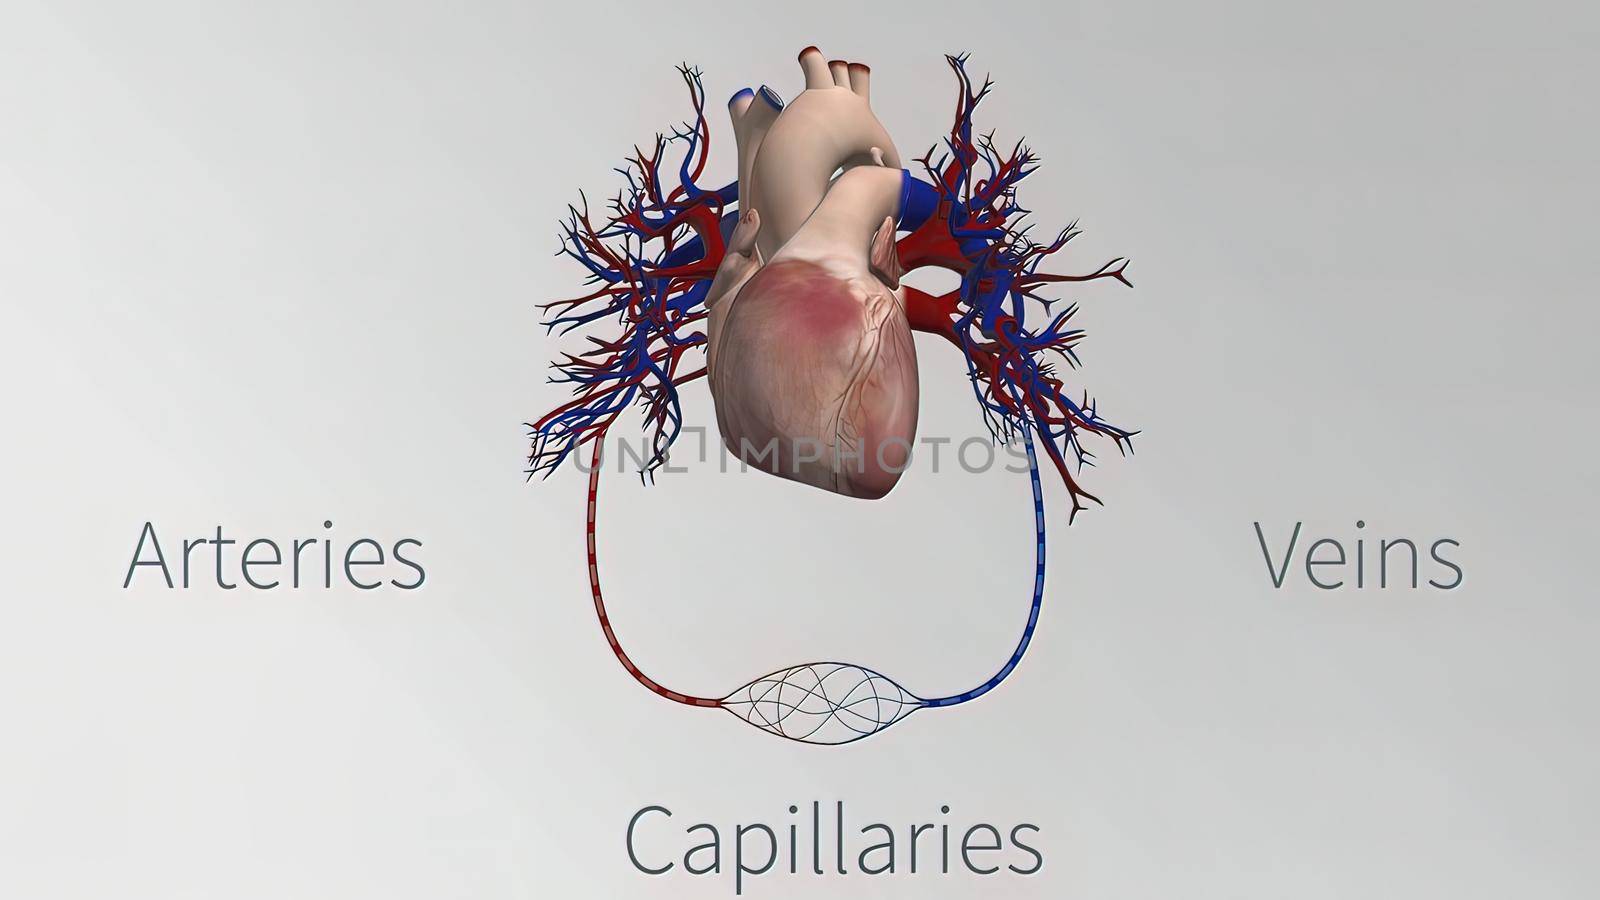 The vessels of the cardiovascular system are the heart, arteries, capillaries, and veins. 3D illustration